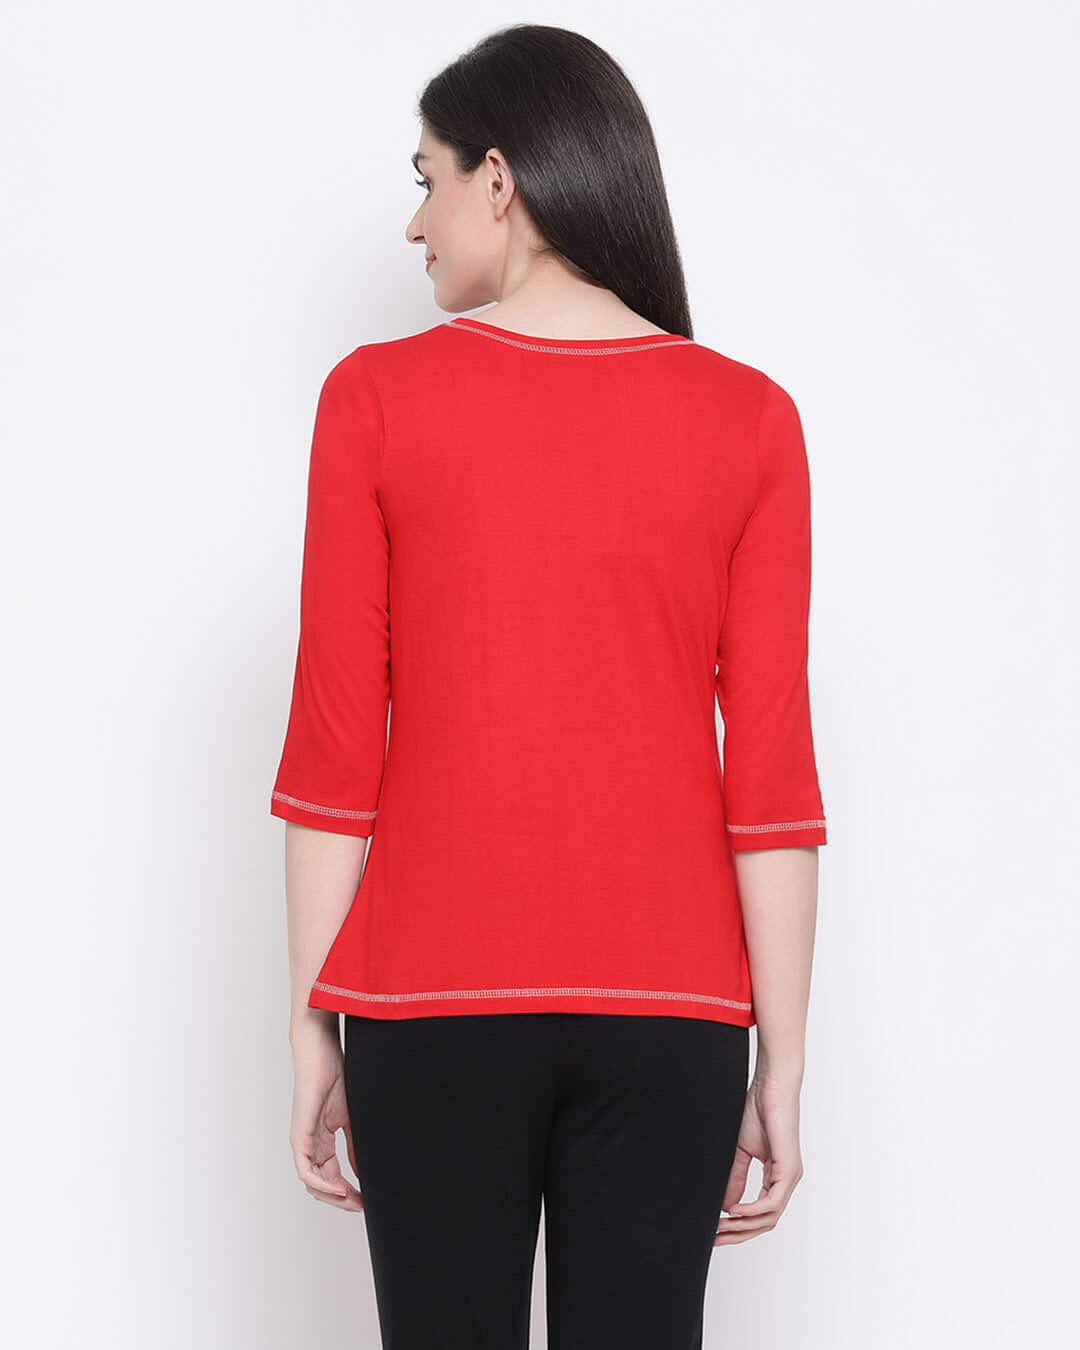 Shop Chic Basic Top In Red 100% Cotton-Back